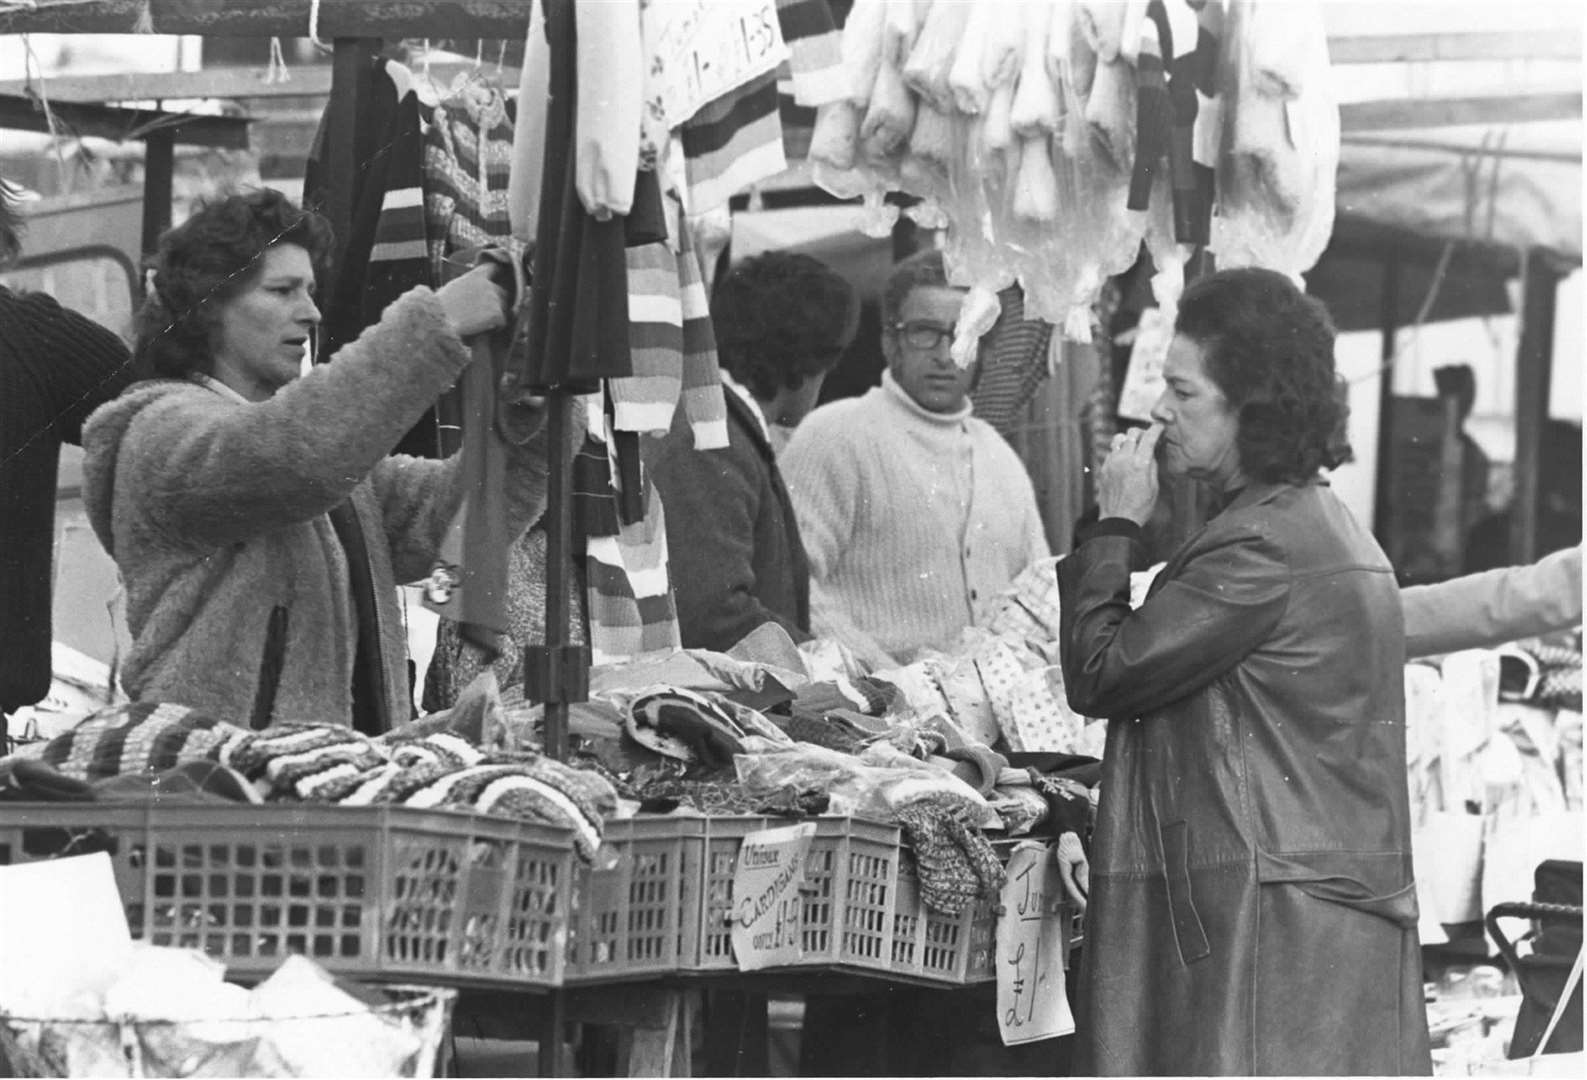 Folkestone market has a long history in the town. Pictured in October 1974